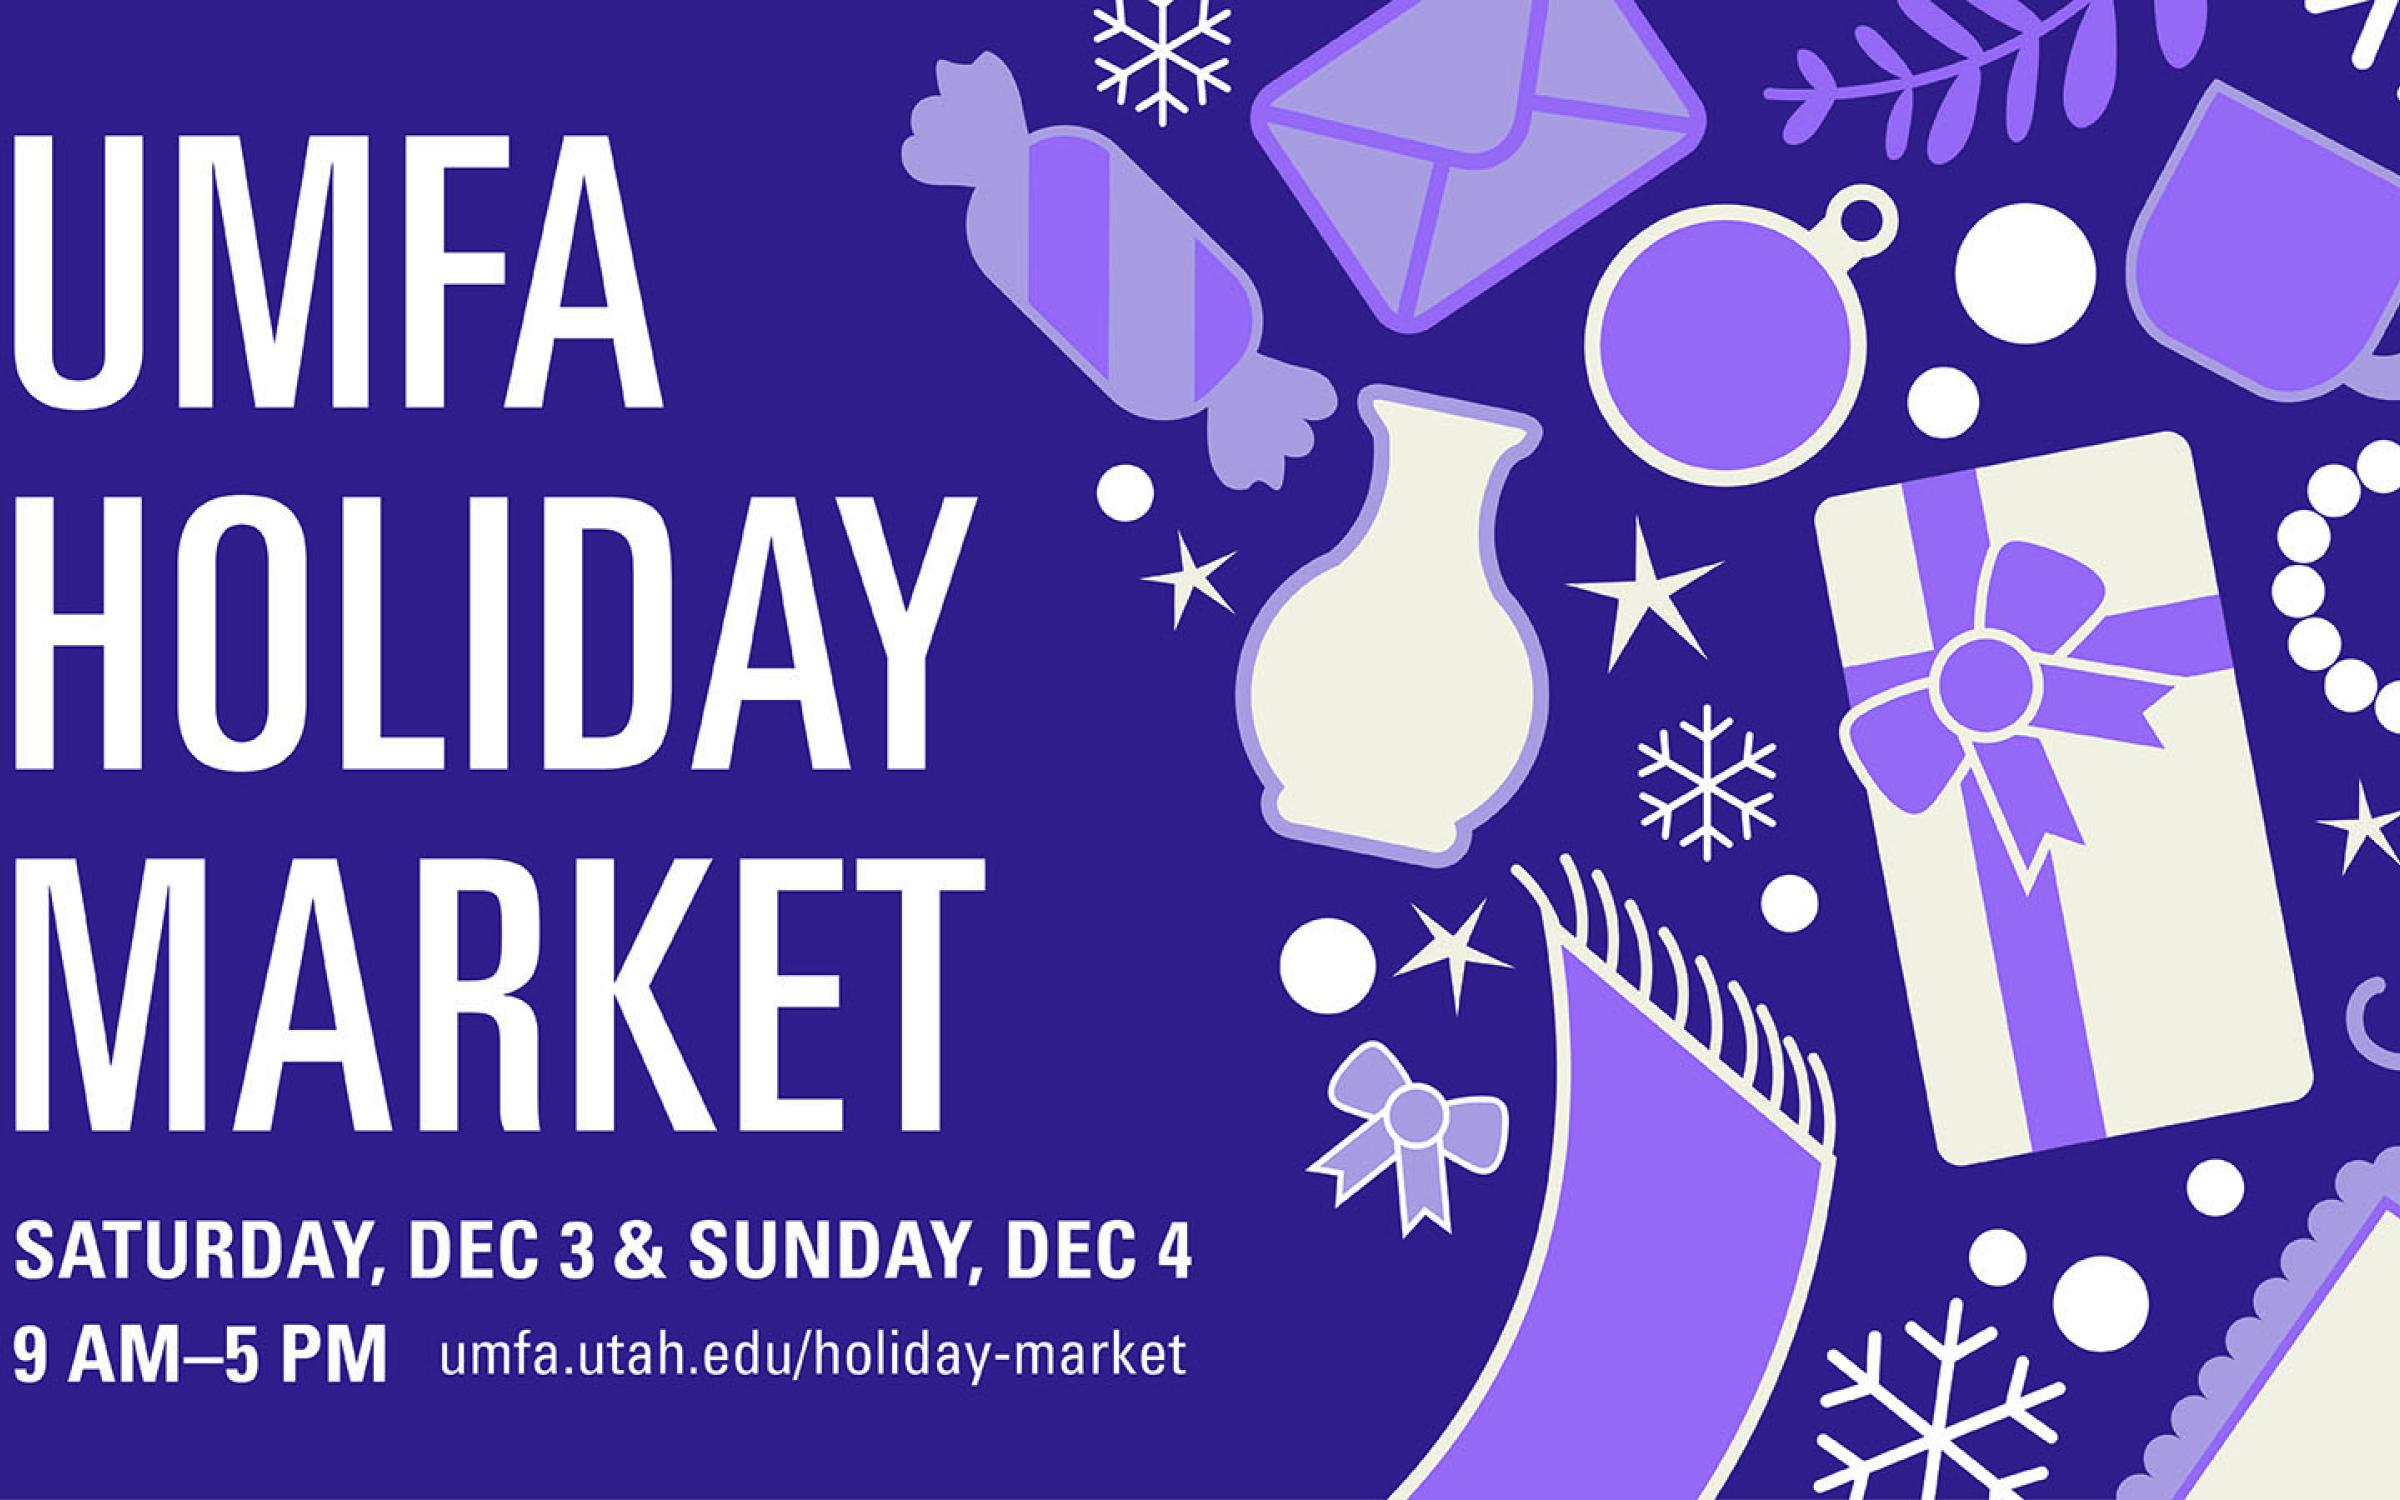 UMFA Holiday Market on purple background with holiday themed icons on the right side